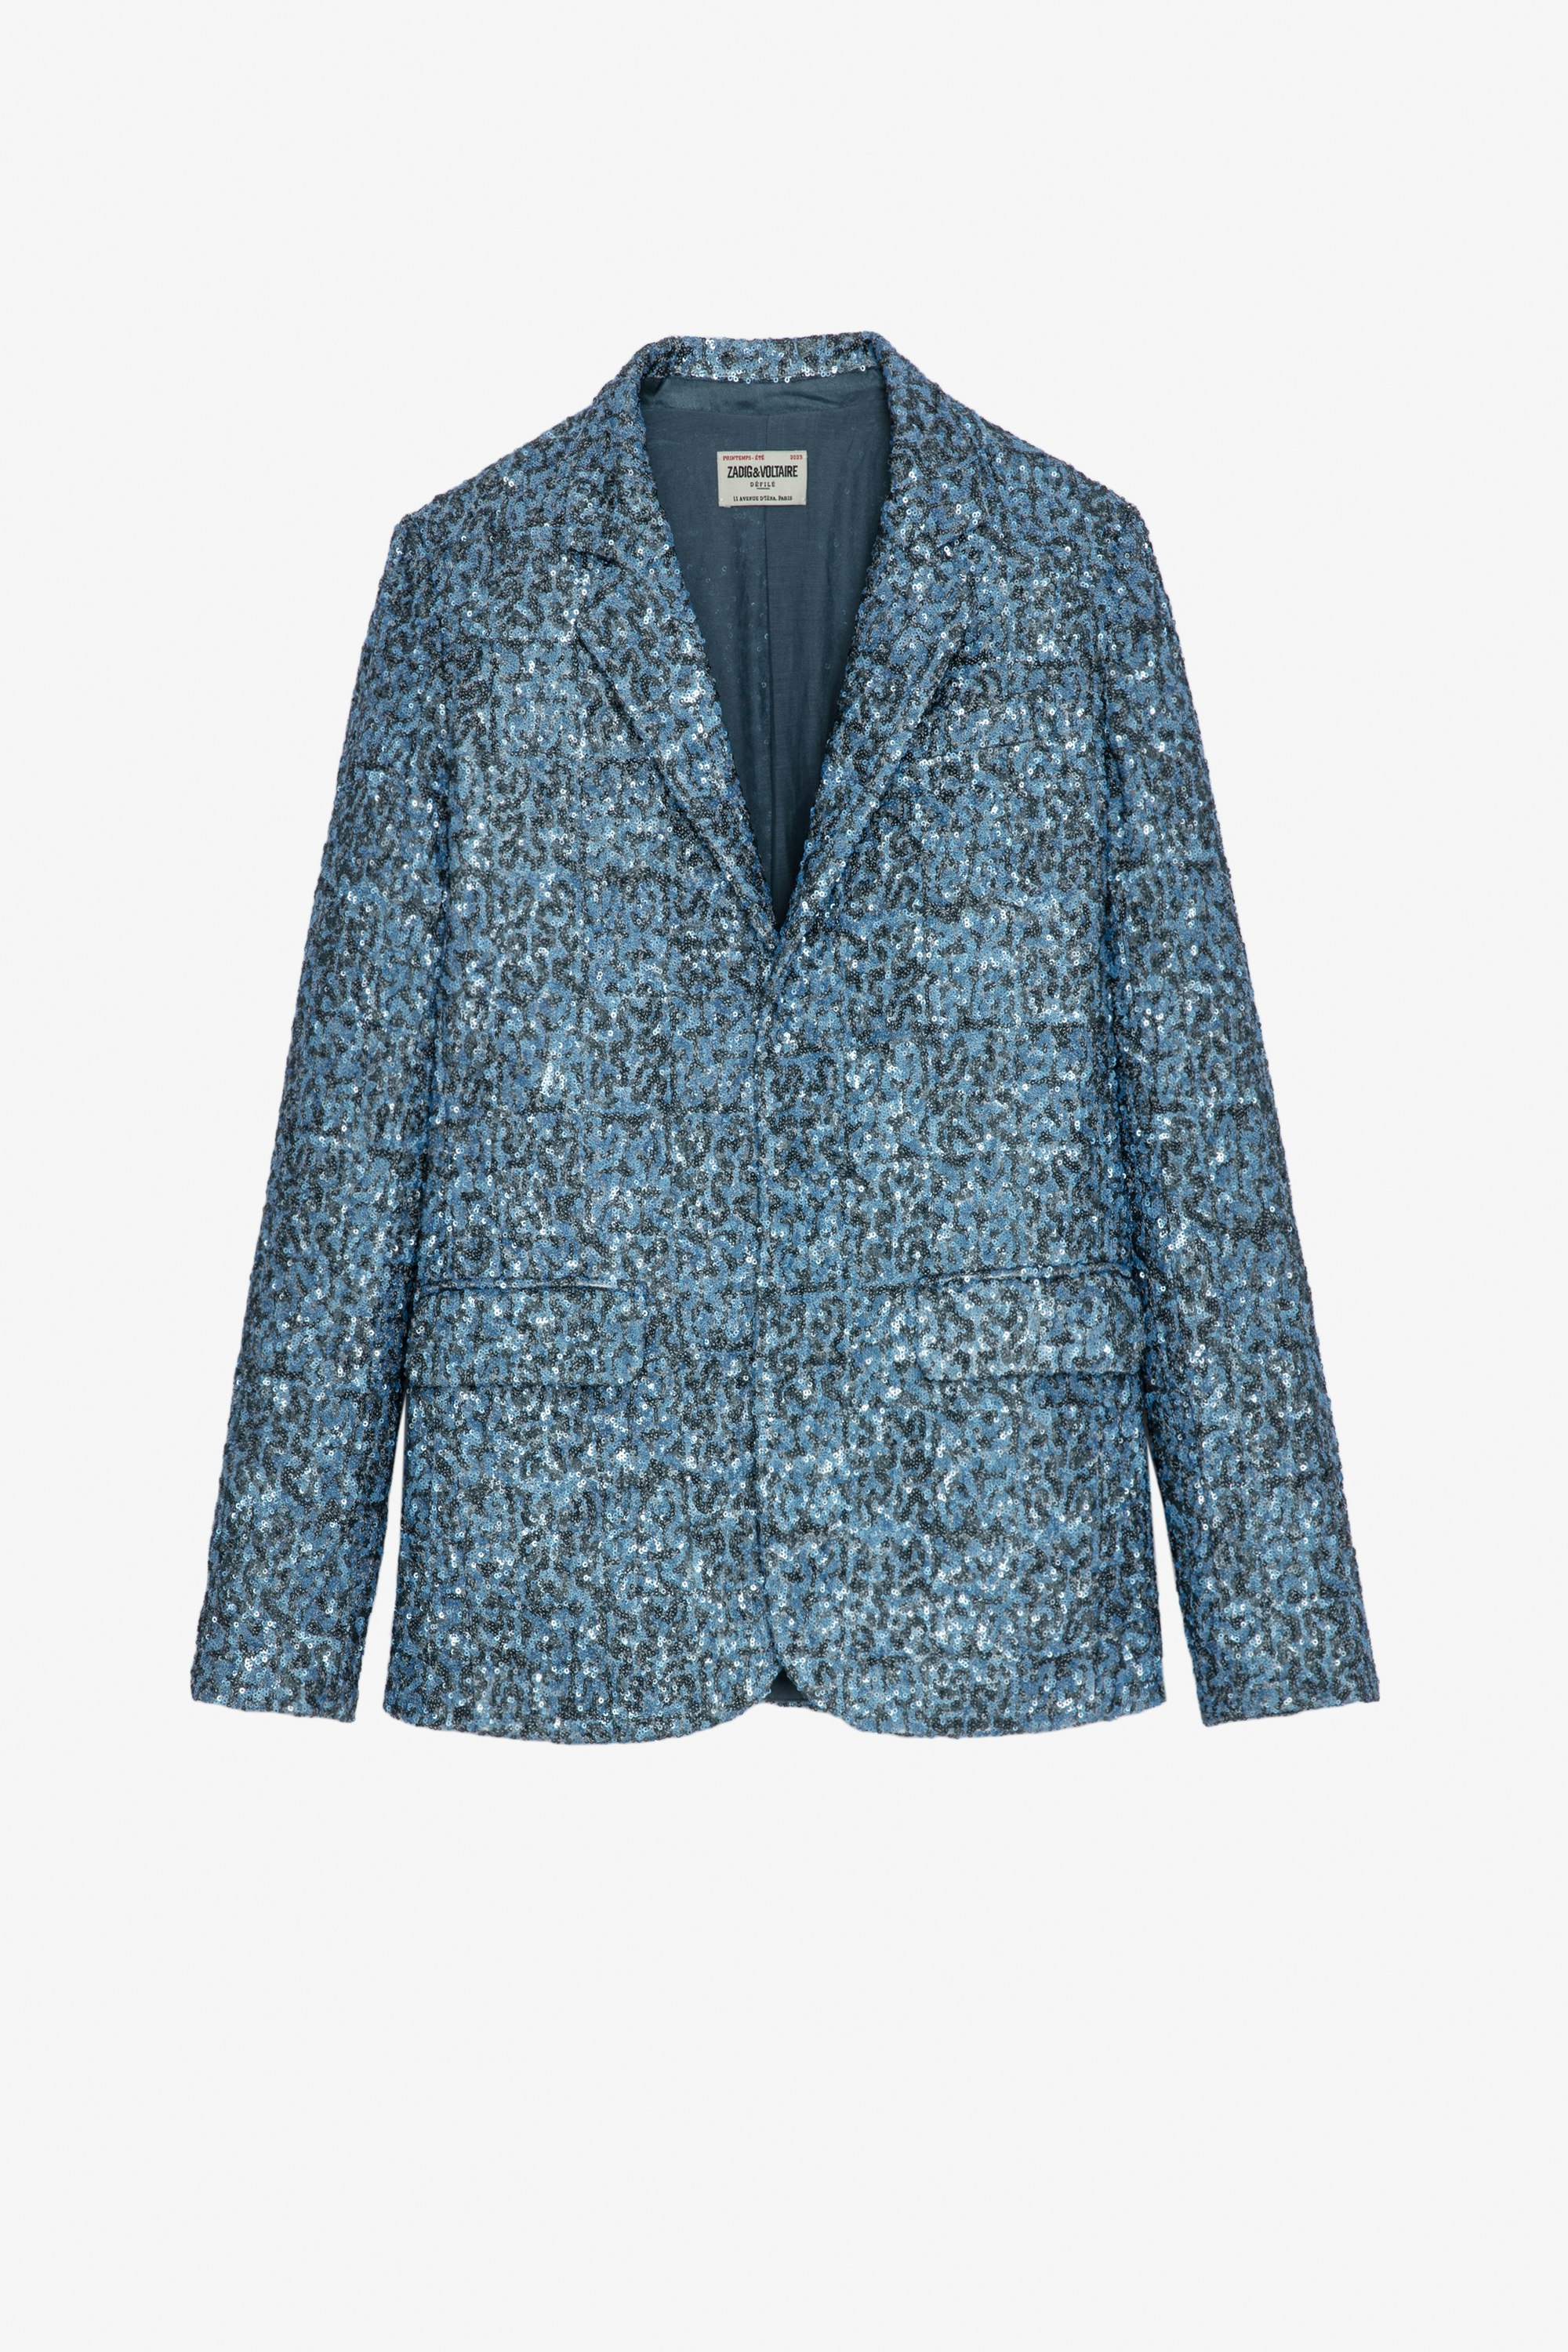 Vanille Sequins Jacket Women's blue tailored jacket with all-over sequins